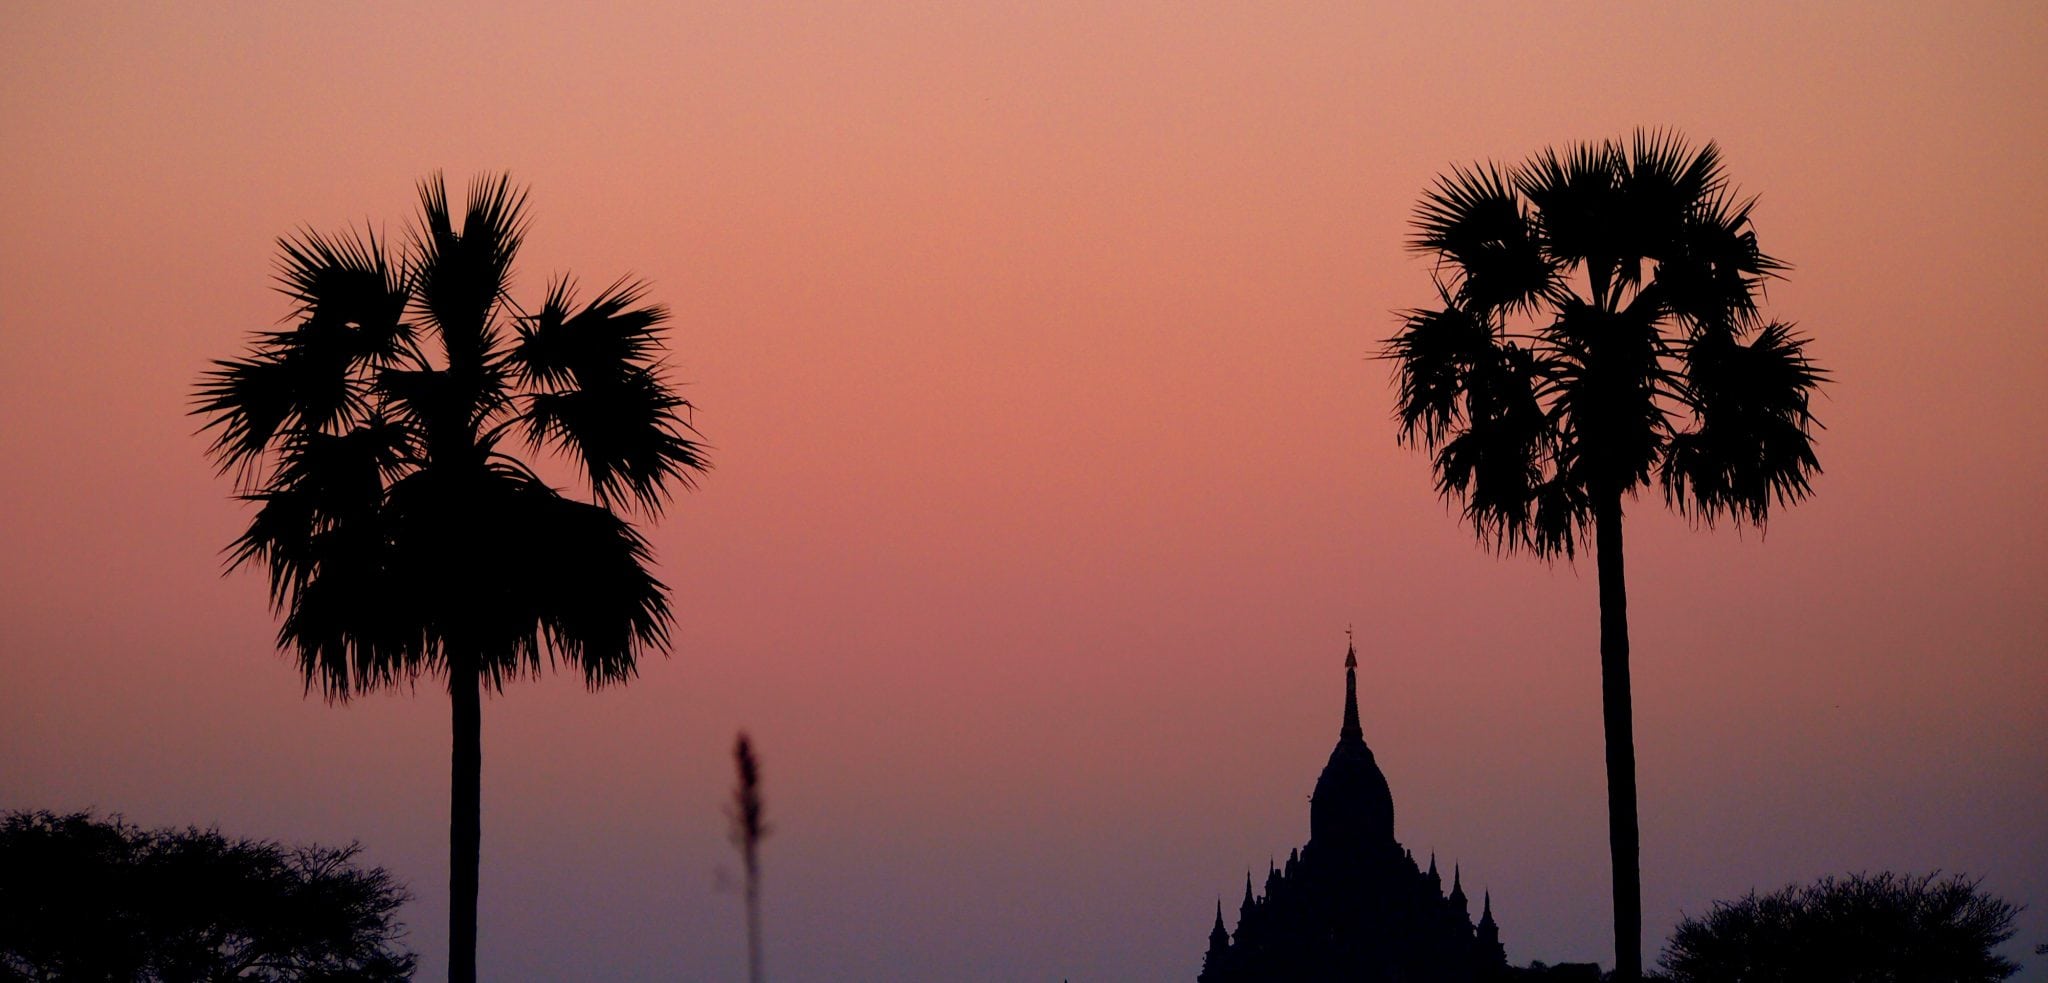 By the dusk in the temple town of Bagan, Myanmar.